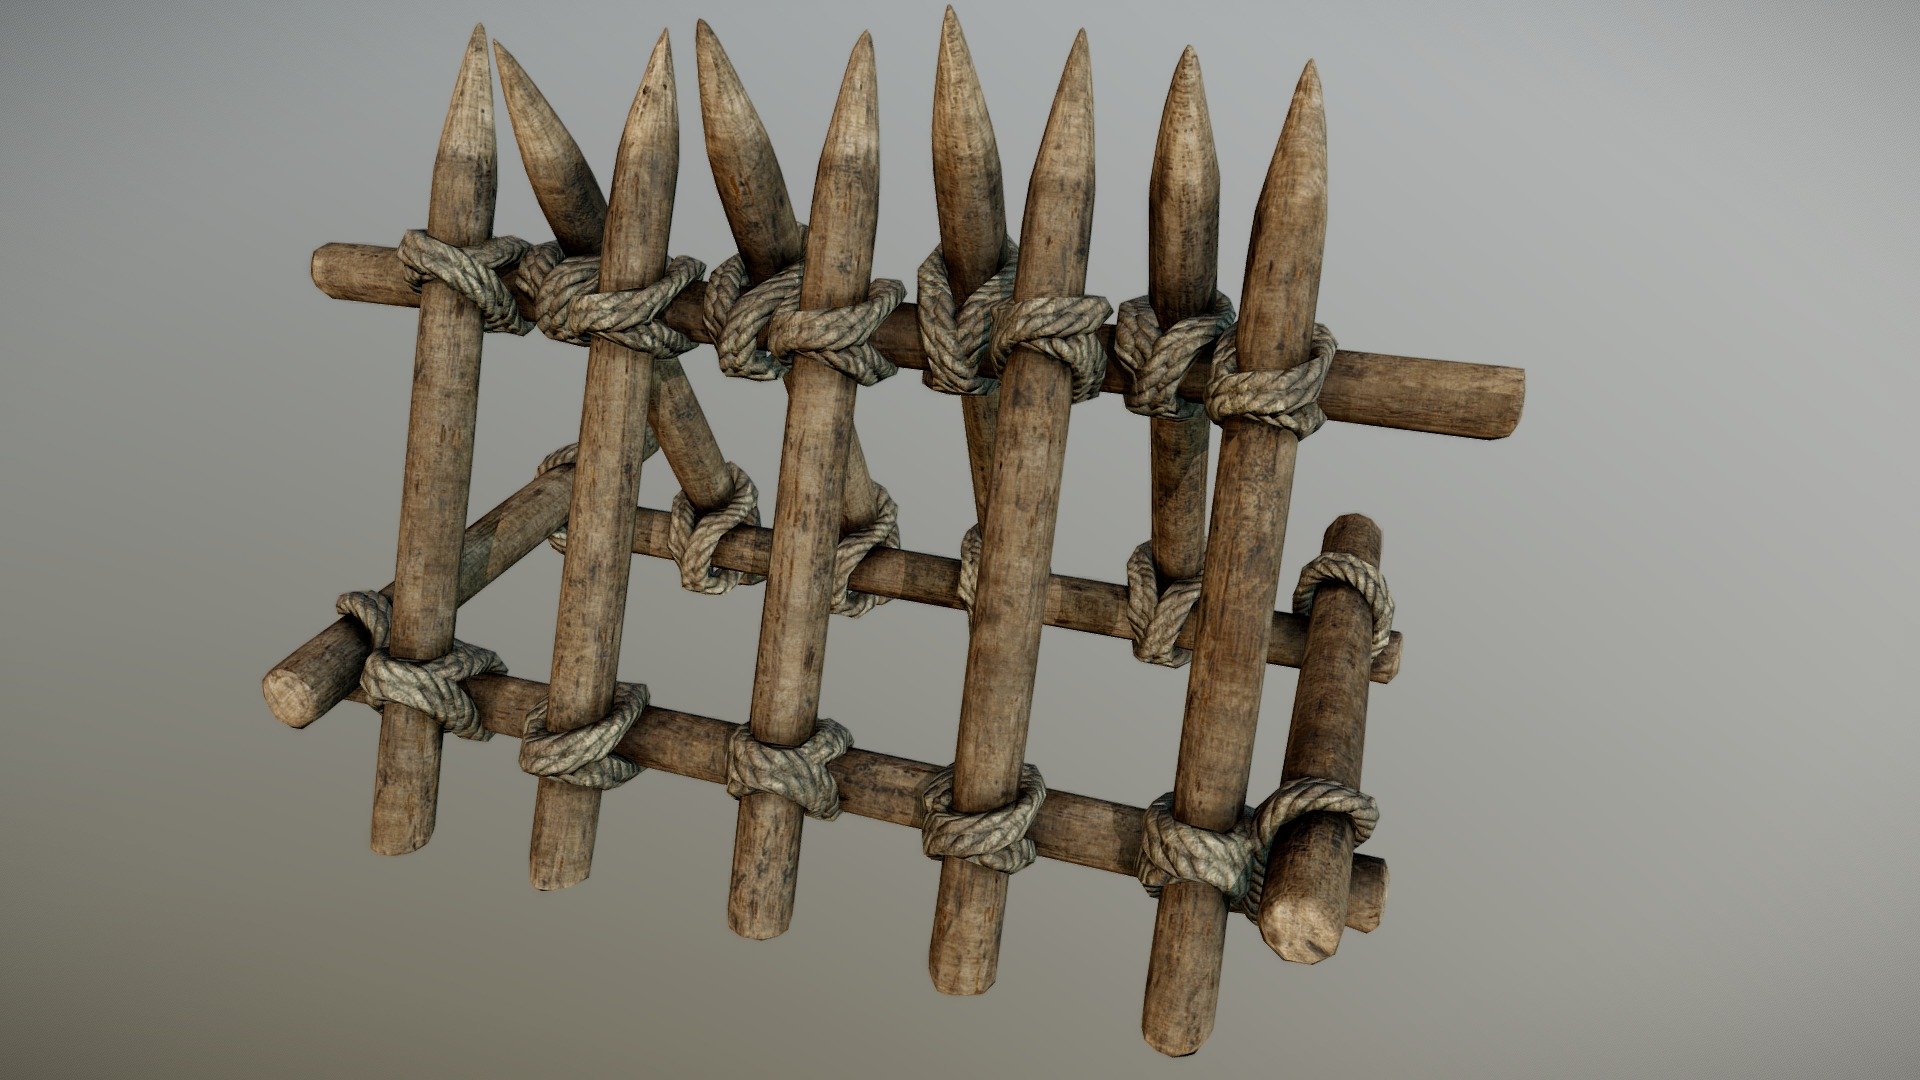 Wooden Barricade Defense PBR

Very Detailed Low Poly Wooden Barricade Defense Obstacle with High-Quality PBR Texturing

Fits perfect for any PBR game Environment.

Created using 3DSMAX, Zbrush and Substance Painter.

Standard Textures
Base Color, Metallic, Roughness, Height, AO, Normal, Maps

Unreal 4 Textures
Base Color, Normal, OcclusionRoughnessMetallic

Unity 5/2017 Textures
Albedo, SpecularSmoothness, Normal, and AO Maps

4096x4096 TGA Textures

Please Note, this PBR Textures Only. 

Low Poly Triangles 

11540 Tris
5702 Verts

File Formats :

.Max2018
.Max2017
.Max2016
.Max2015
.FBX
.OBJ
.3DS
.DAE - Wooden Barricade Defense PBR - Buy Royalty Free 3D model by GamePoly (@triix3d) 3d model